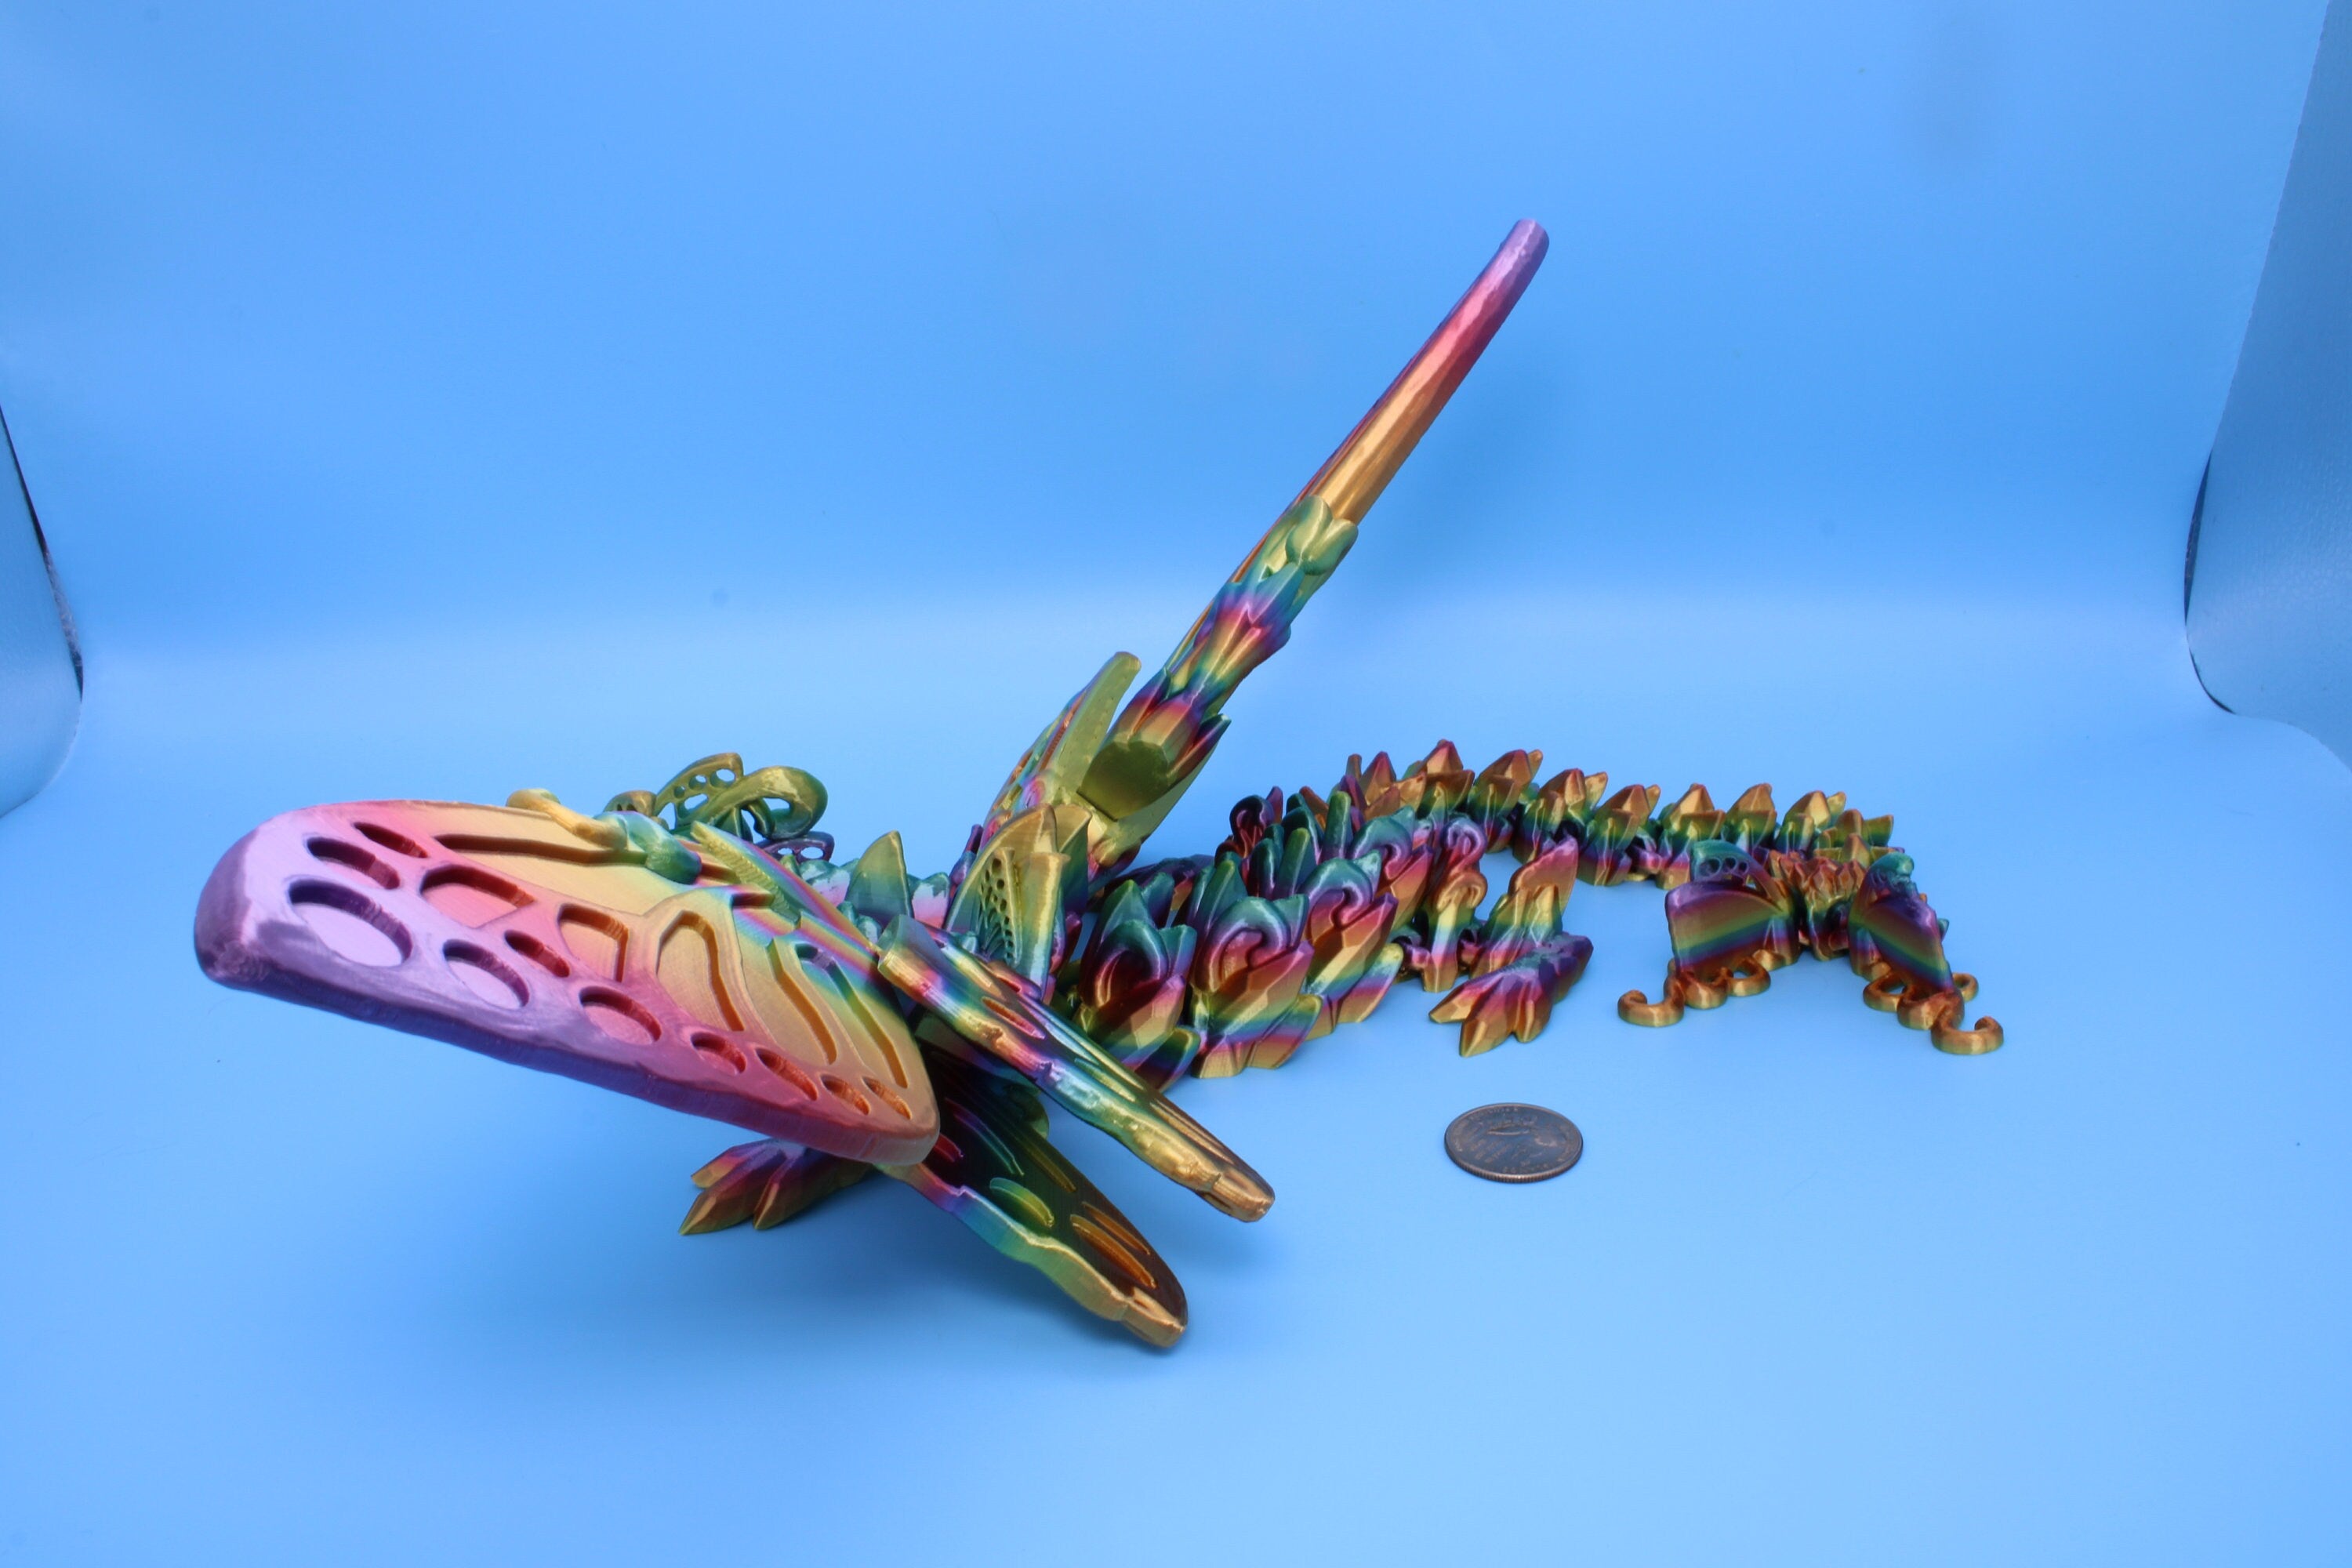 Butterfly Wing Dragon | Rainbow | Butterfly Wing Dragon | 3D printed | Articulating Dragon | Fidget Toy | Flexi Toy | 18 in